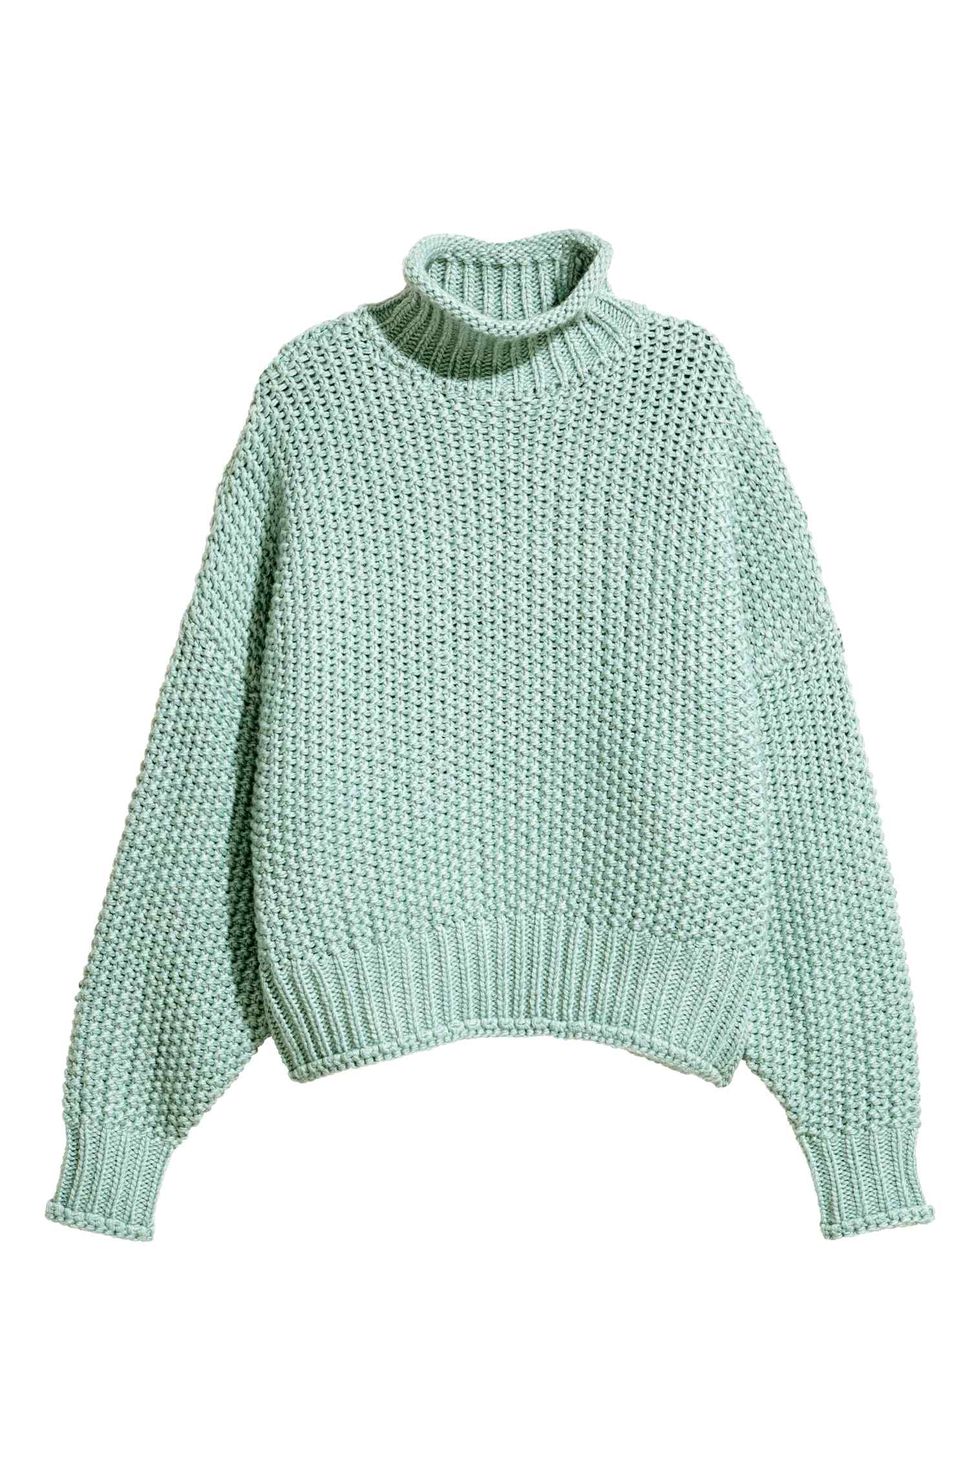 Clothing, Green, Outerwear, Sleeve, Wool, Turquoise, Sweater, Woolen, Jersey, Top, 